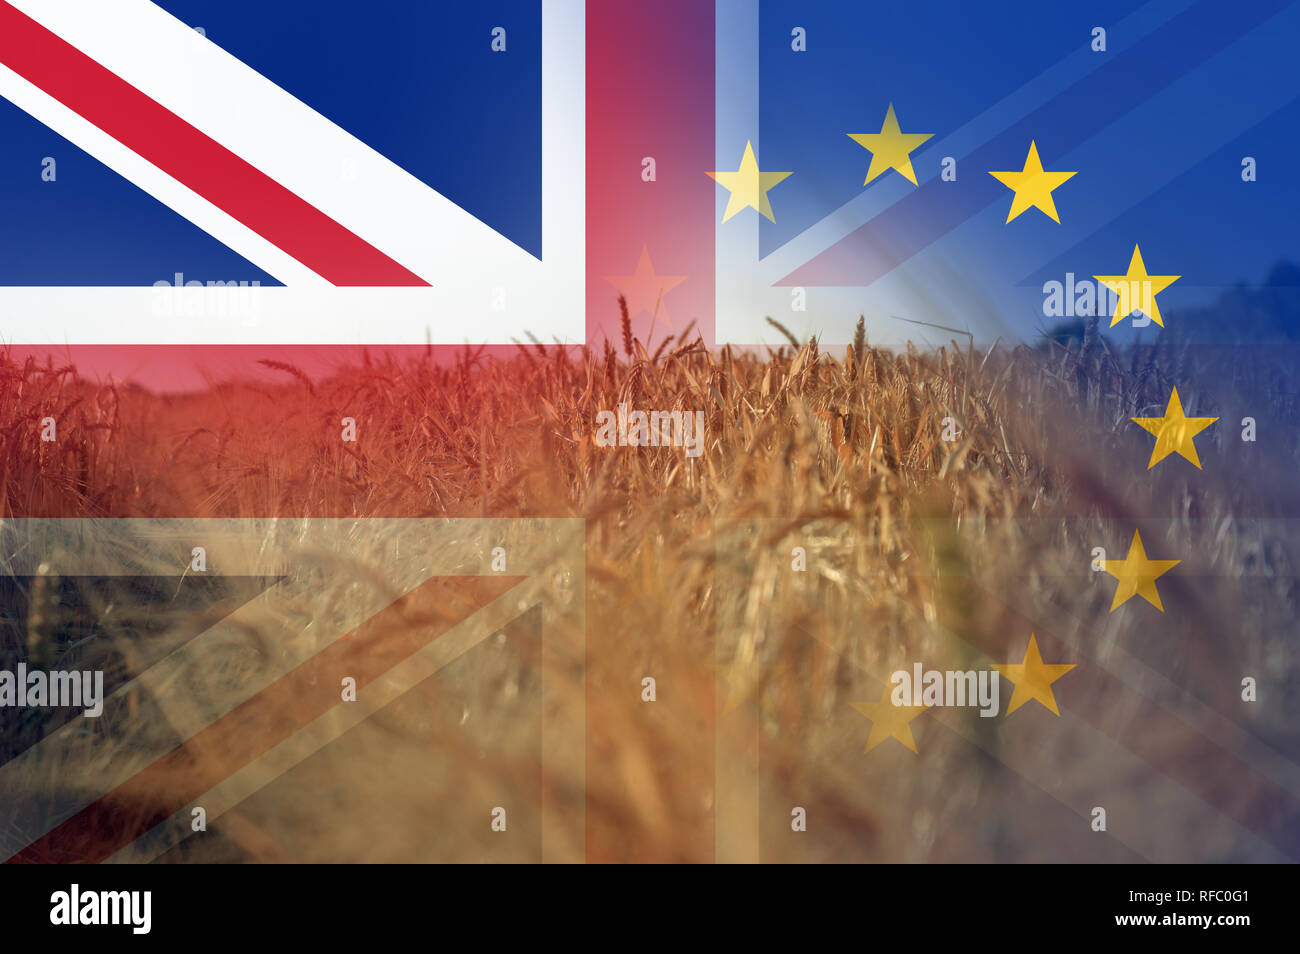 Brexit concept. A field of summer wheat and Barley. With the flags of the Union Jack and the E.U over layered on top. Stock Photo